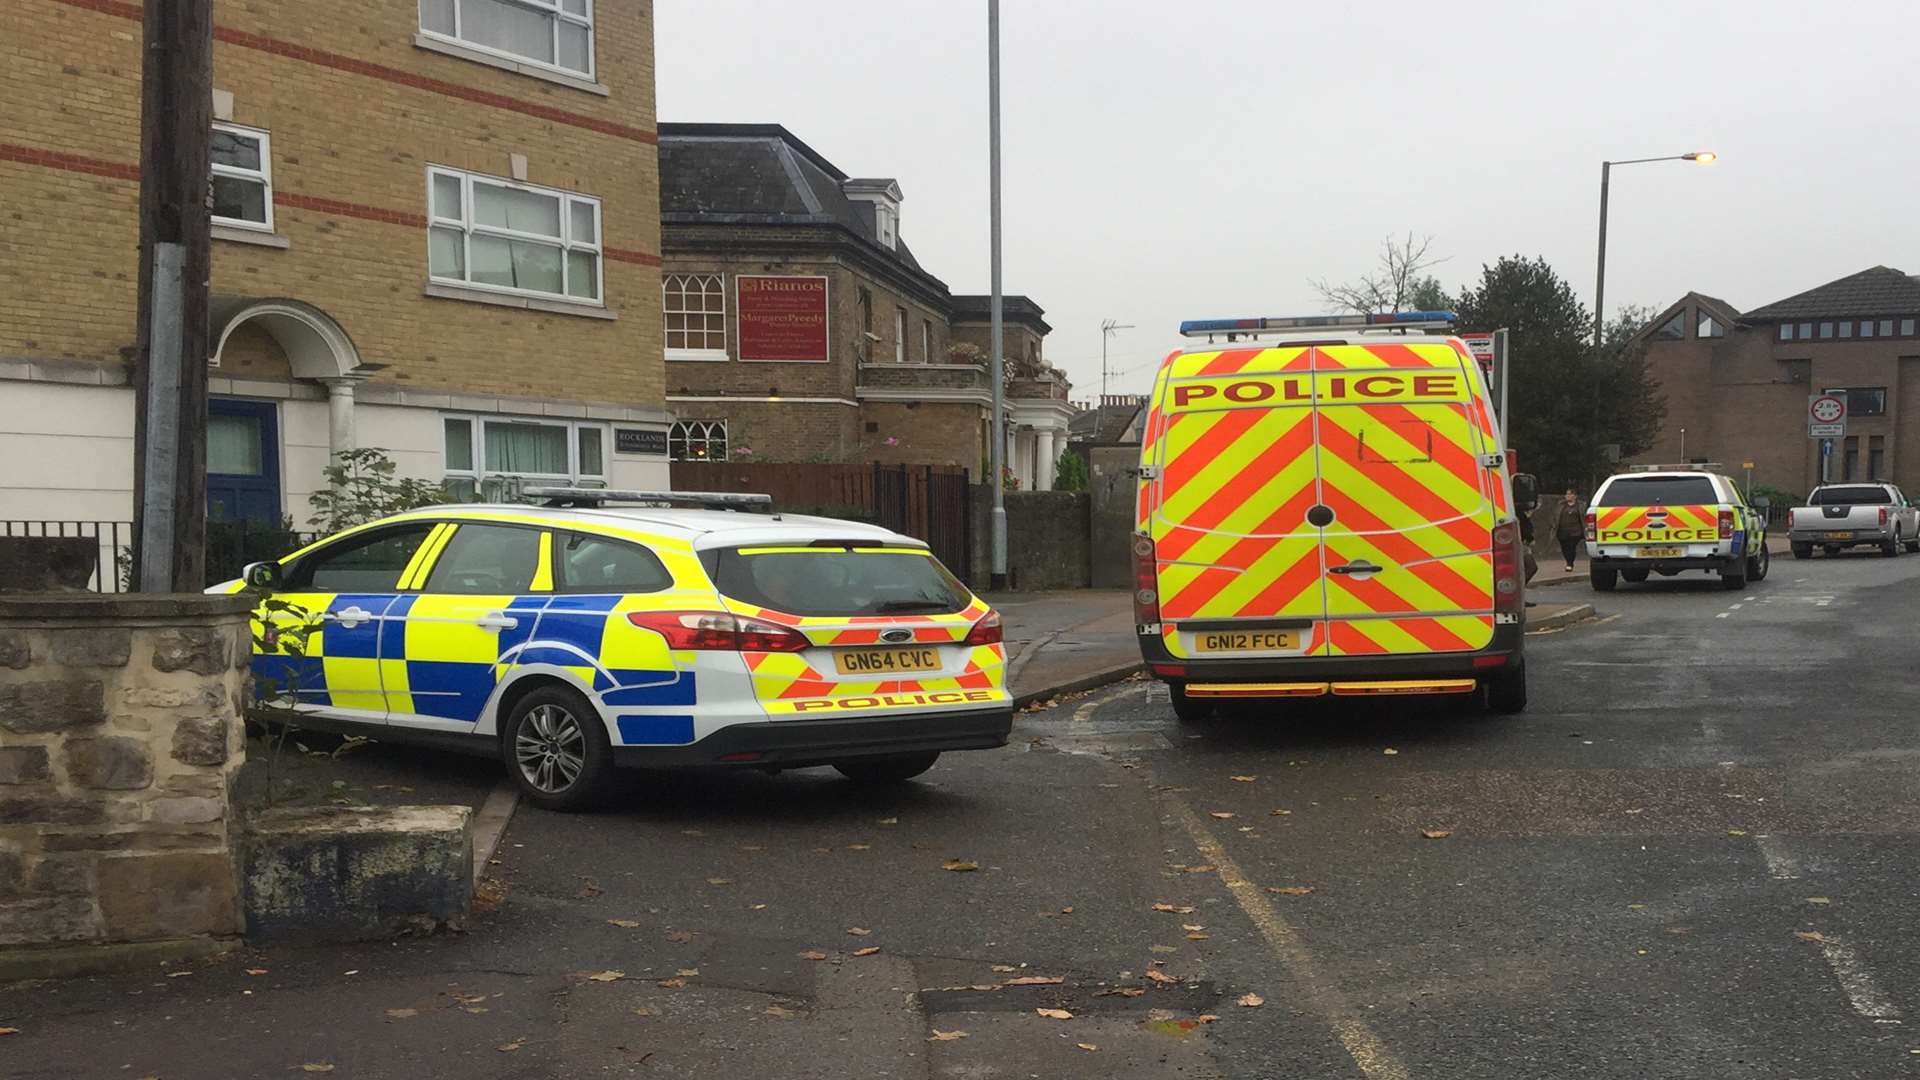 Police were called to Tonbridge Road